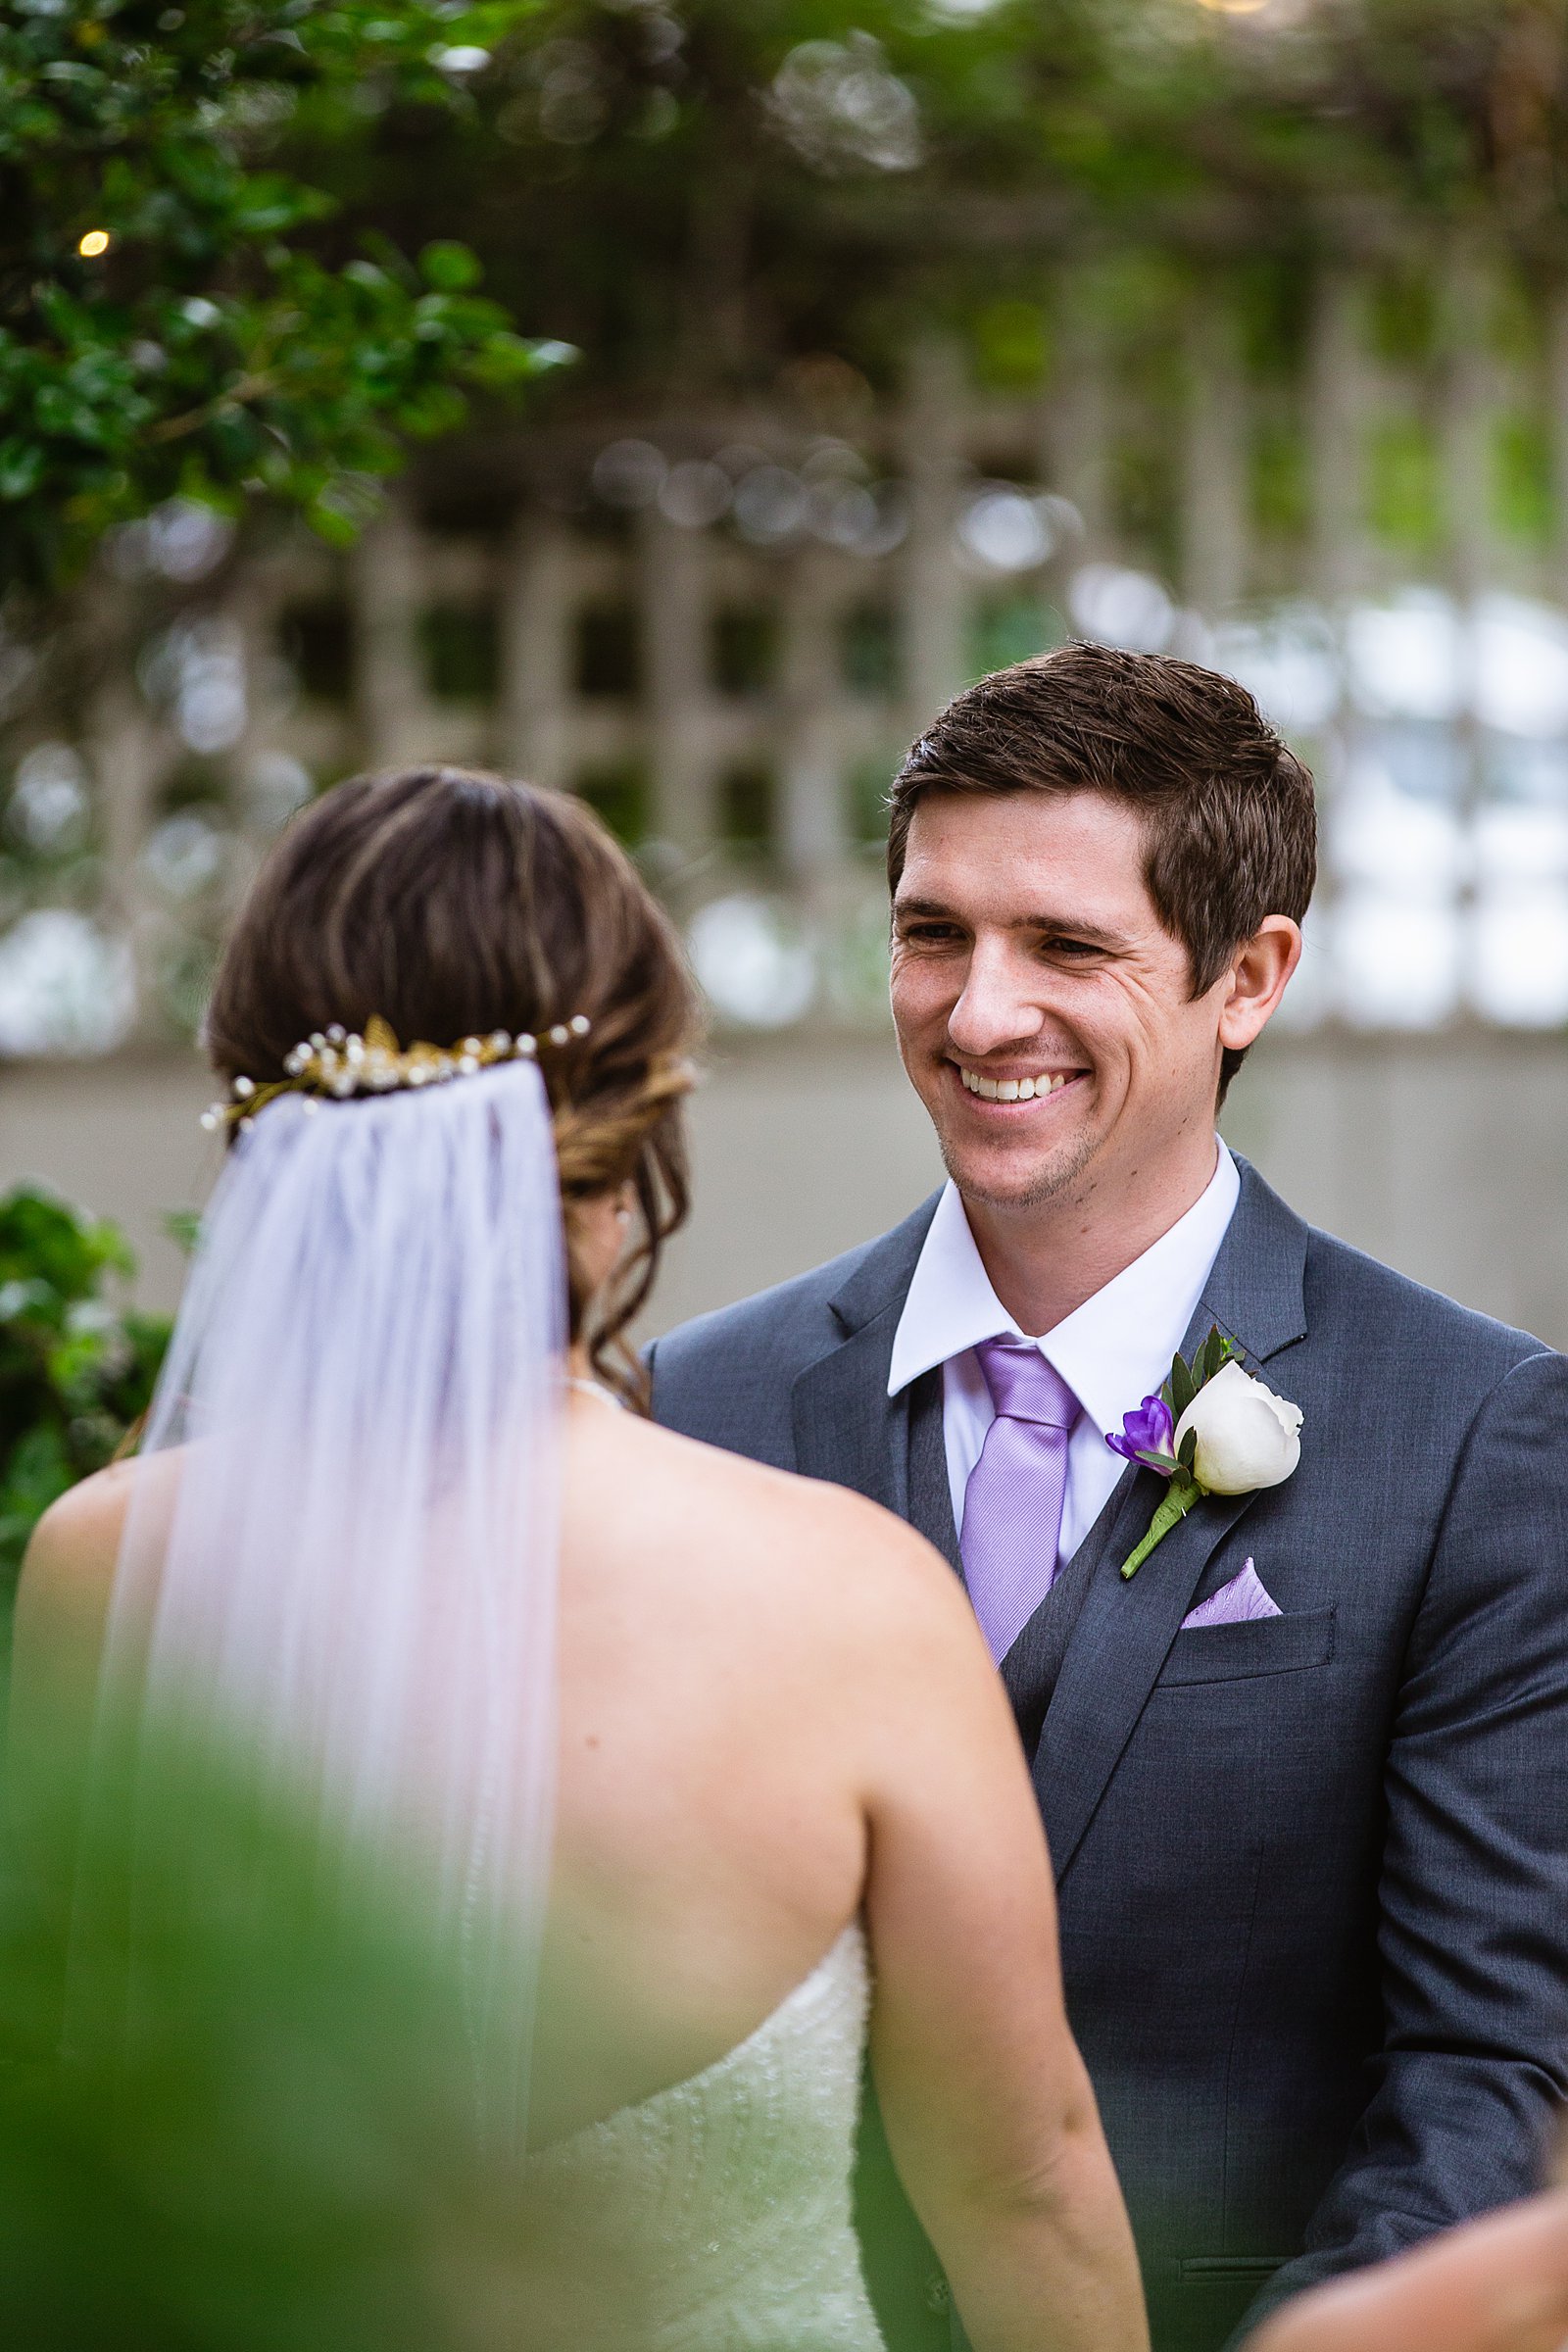 Groom looking at his bride during their wedding ceremony at The Wright House by Mesa wedding photographer PMA Photography.